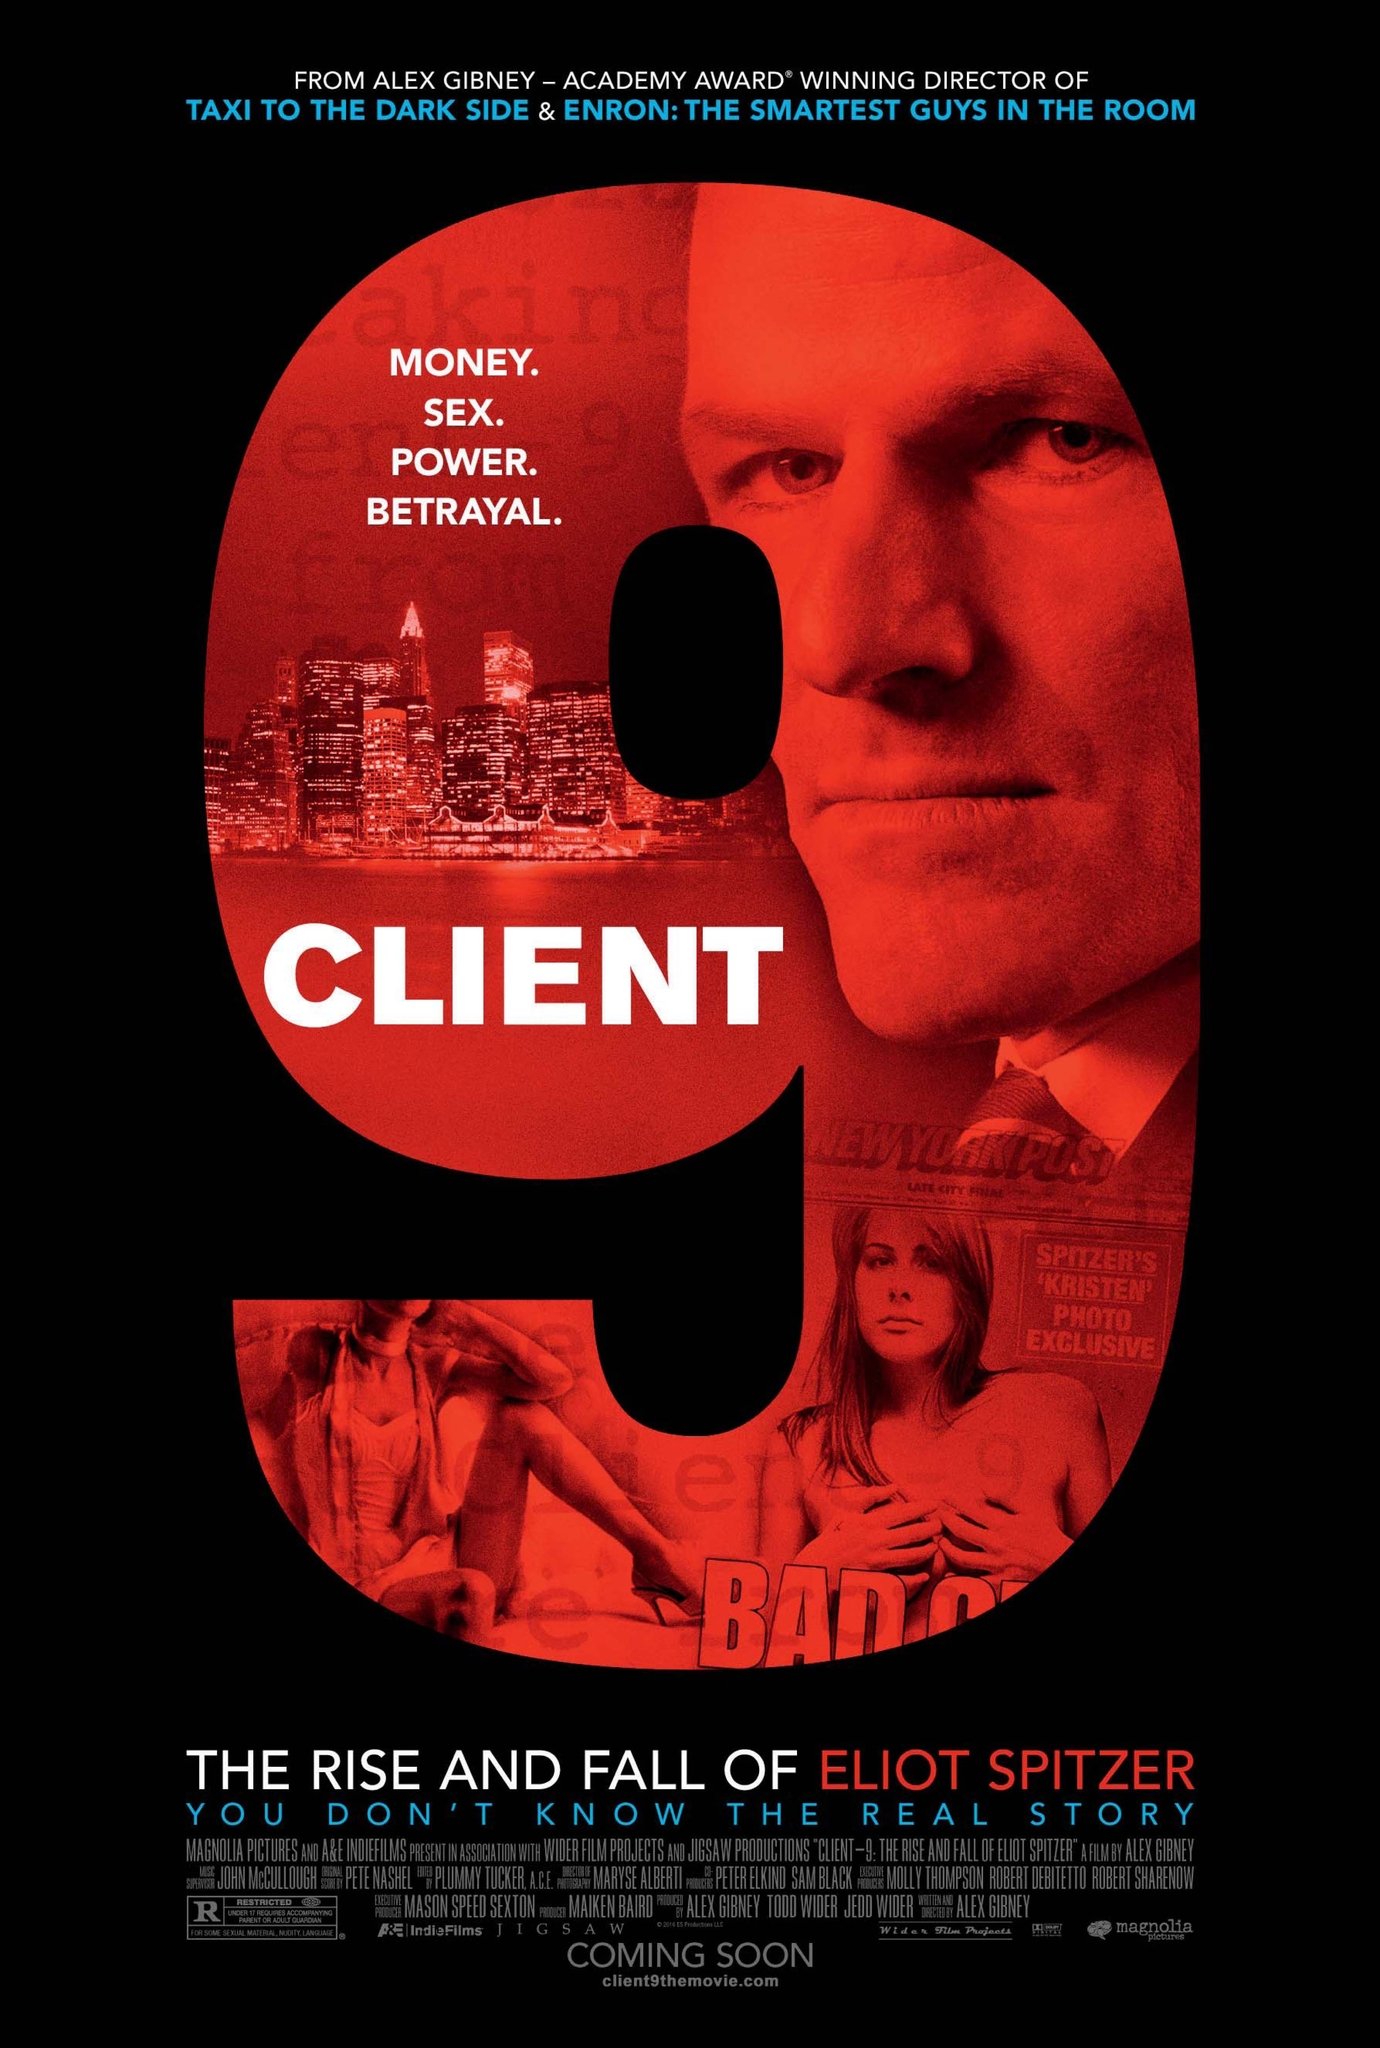 Фото - Client 9: The Rise and Fall of Eliot Spitzer: 1380x2048 / 341 Кб